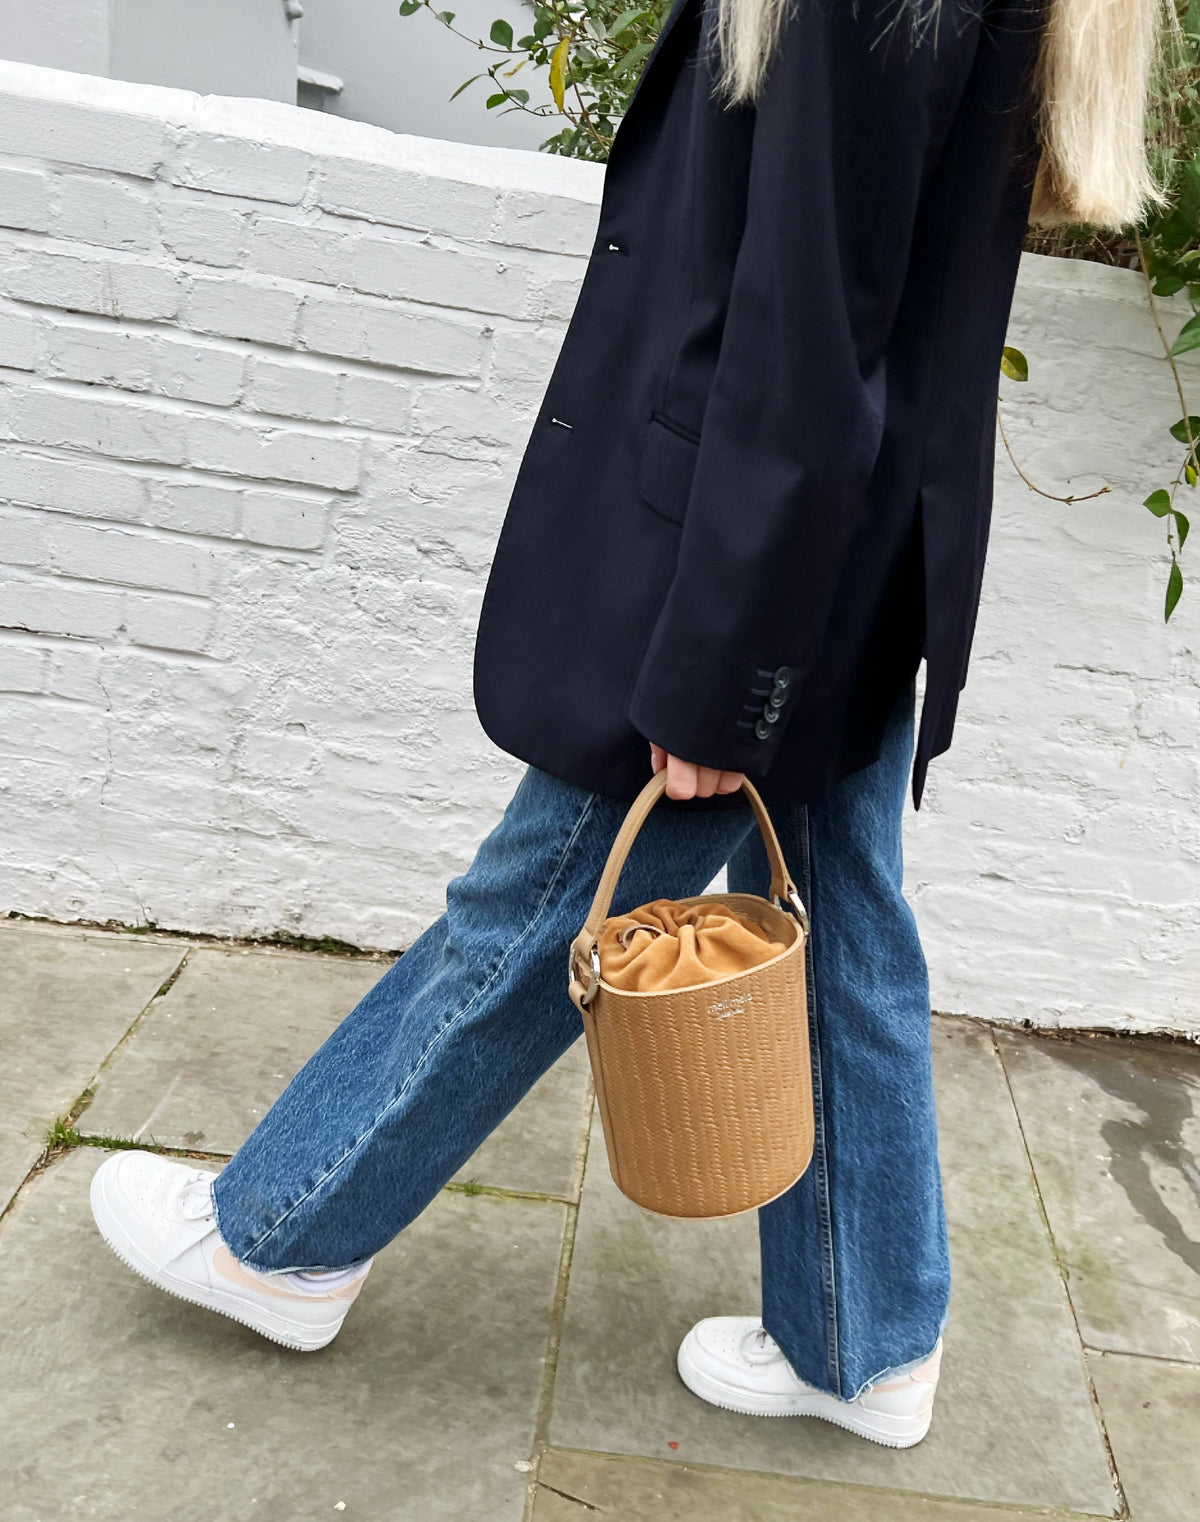 meli melo - Can you feel the Summer Breeze? ☀️ 🏖 Santina Bucket Bag, Woven Light Tan is the perfect mate for your holiday 😎 #holiday #summer  #handbags #leather #melimelobags #style #madeinitaly #fashion